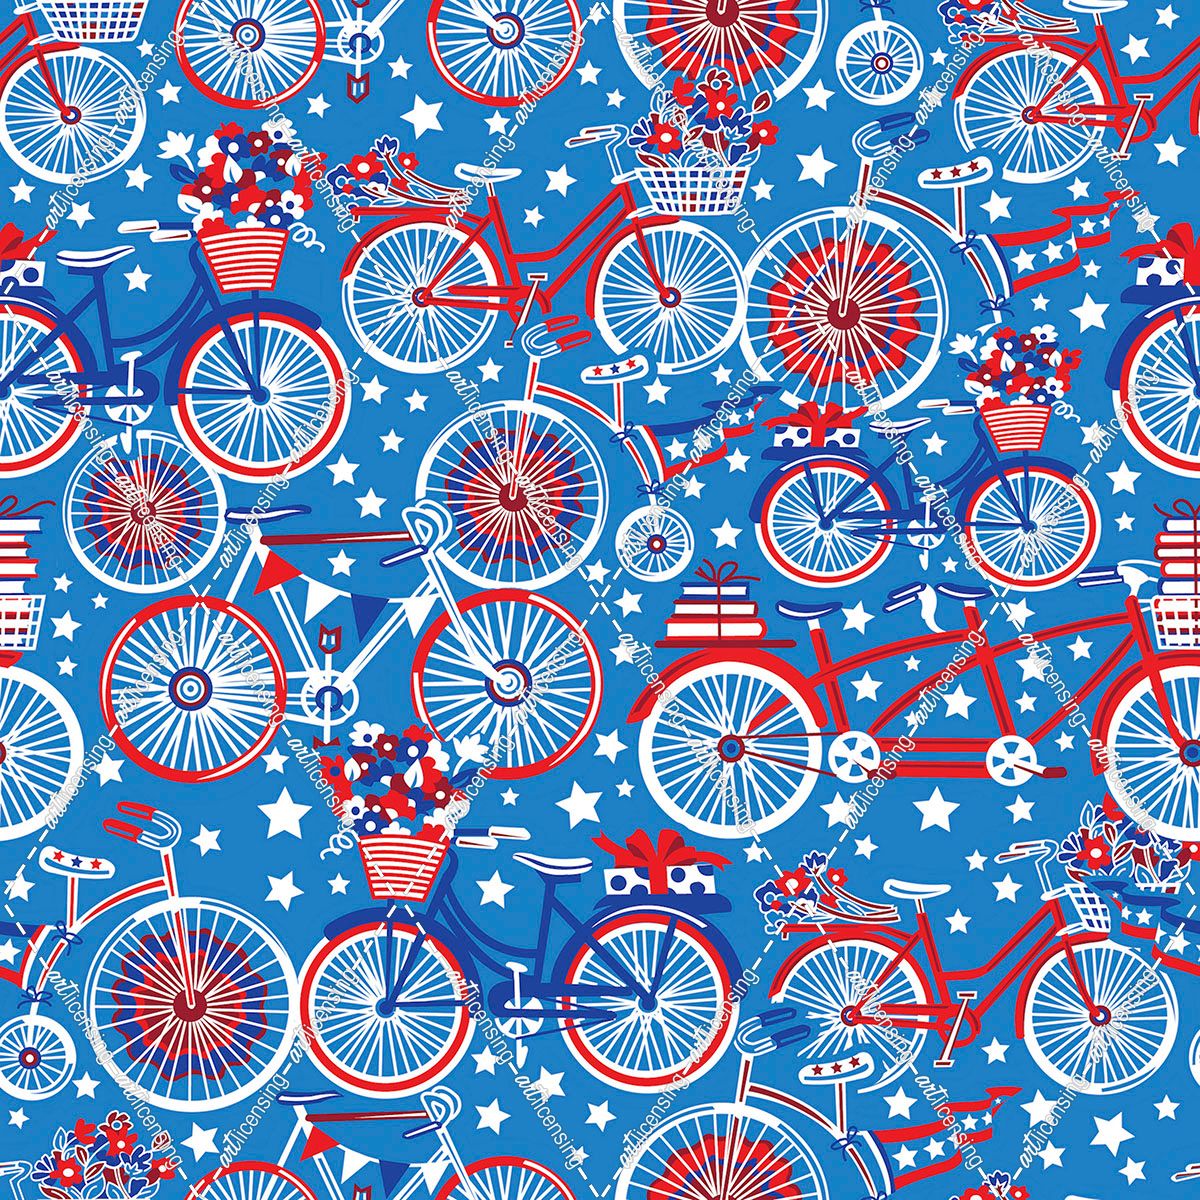 Cycling on July 4th